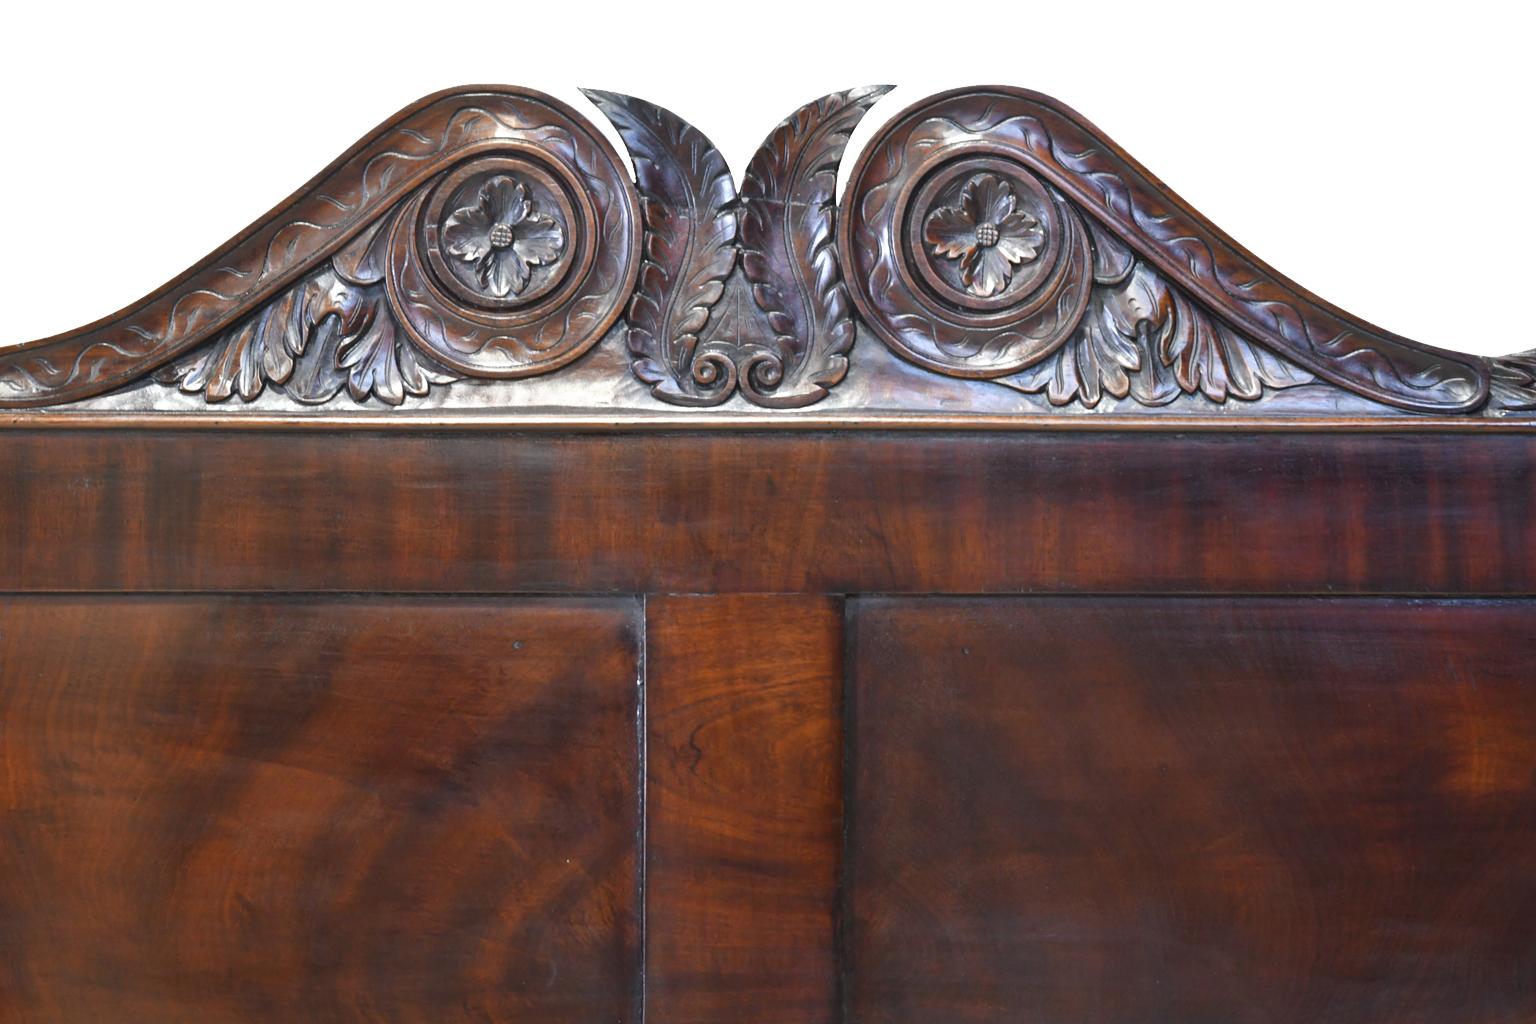 19th Century Antique British Colonial Four Poster Queen-Size Bed in Cuban Mahogany, c. 1820